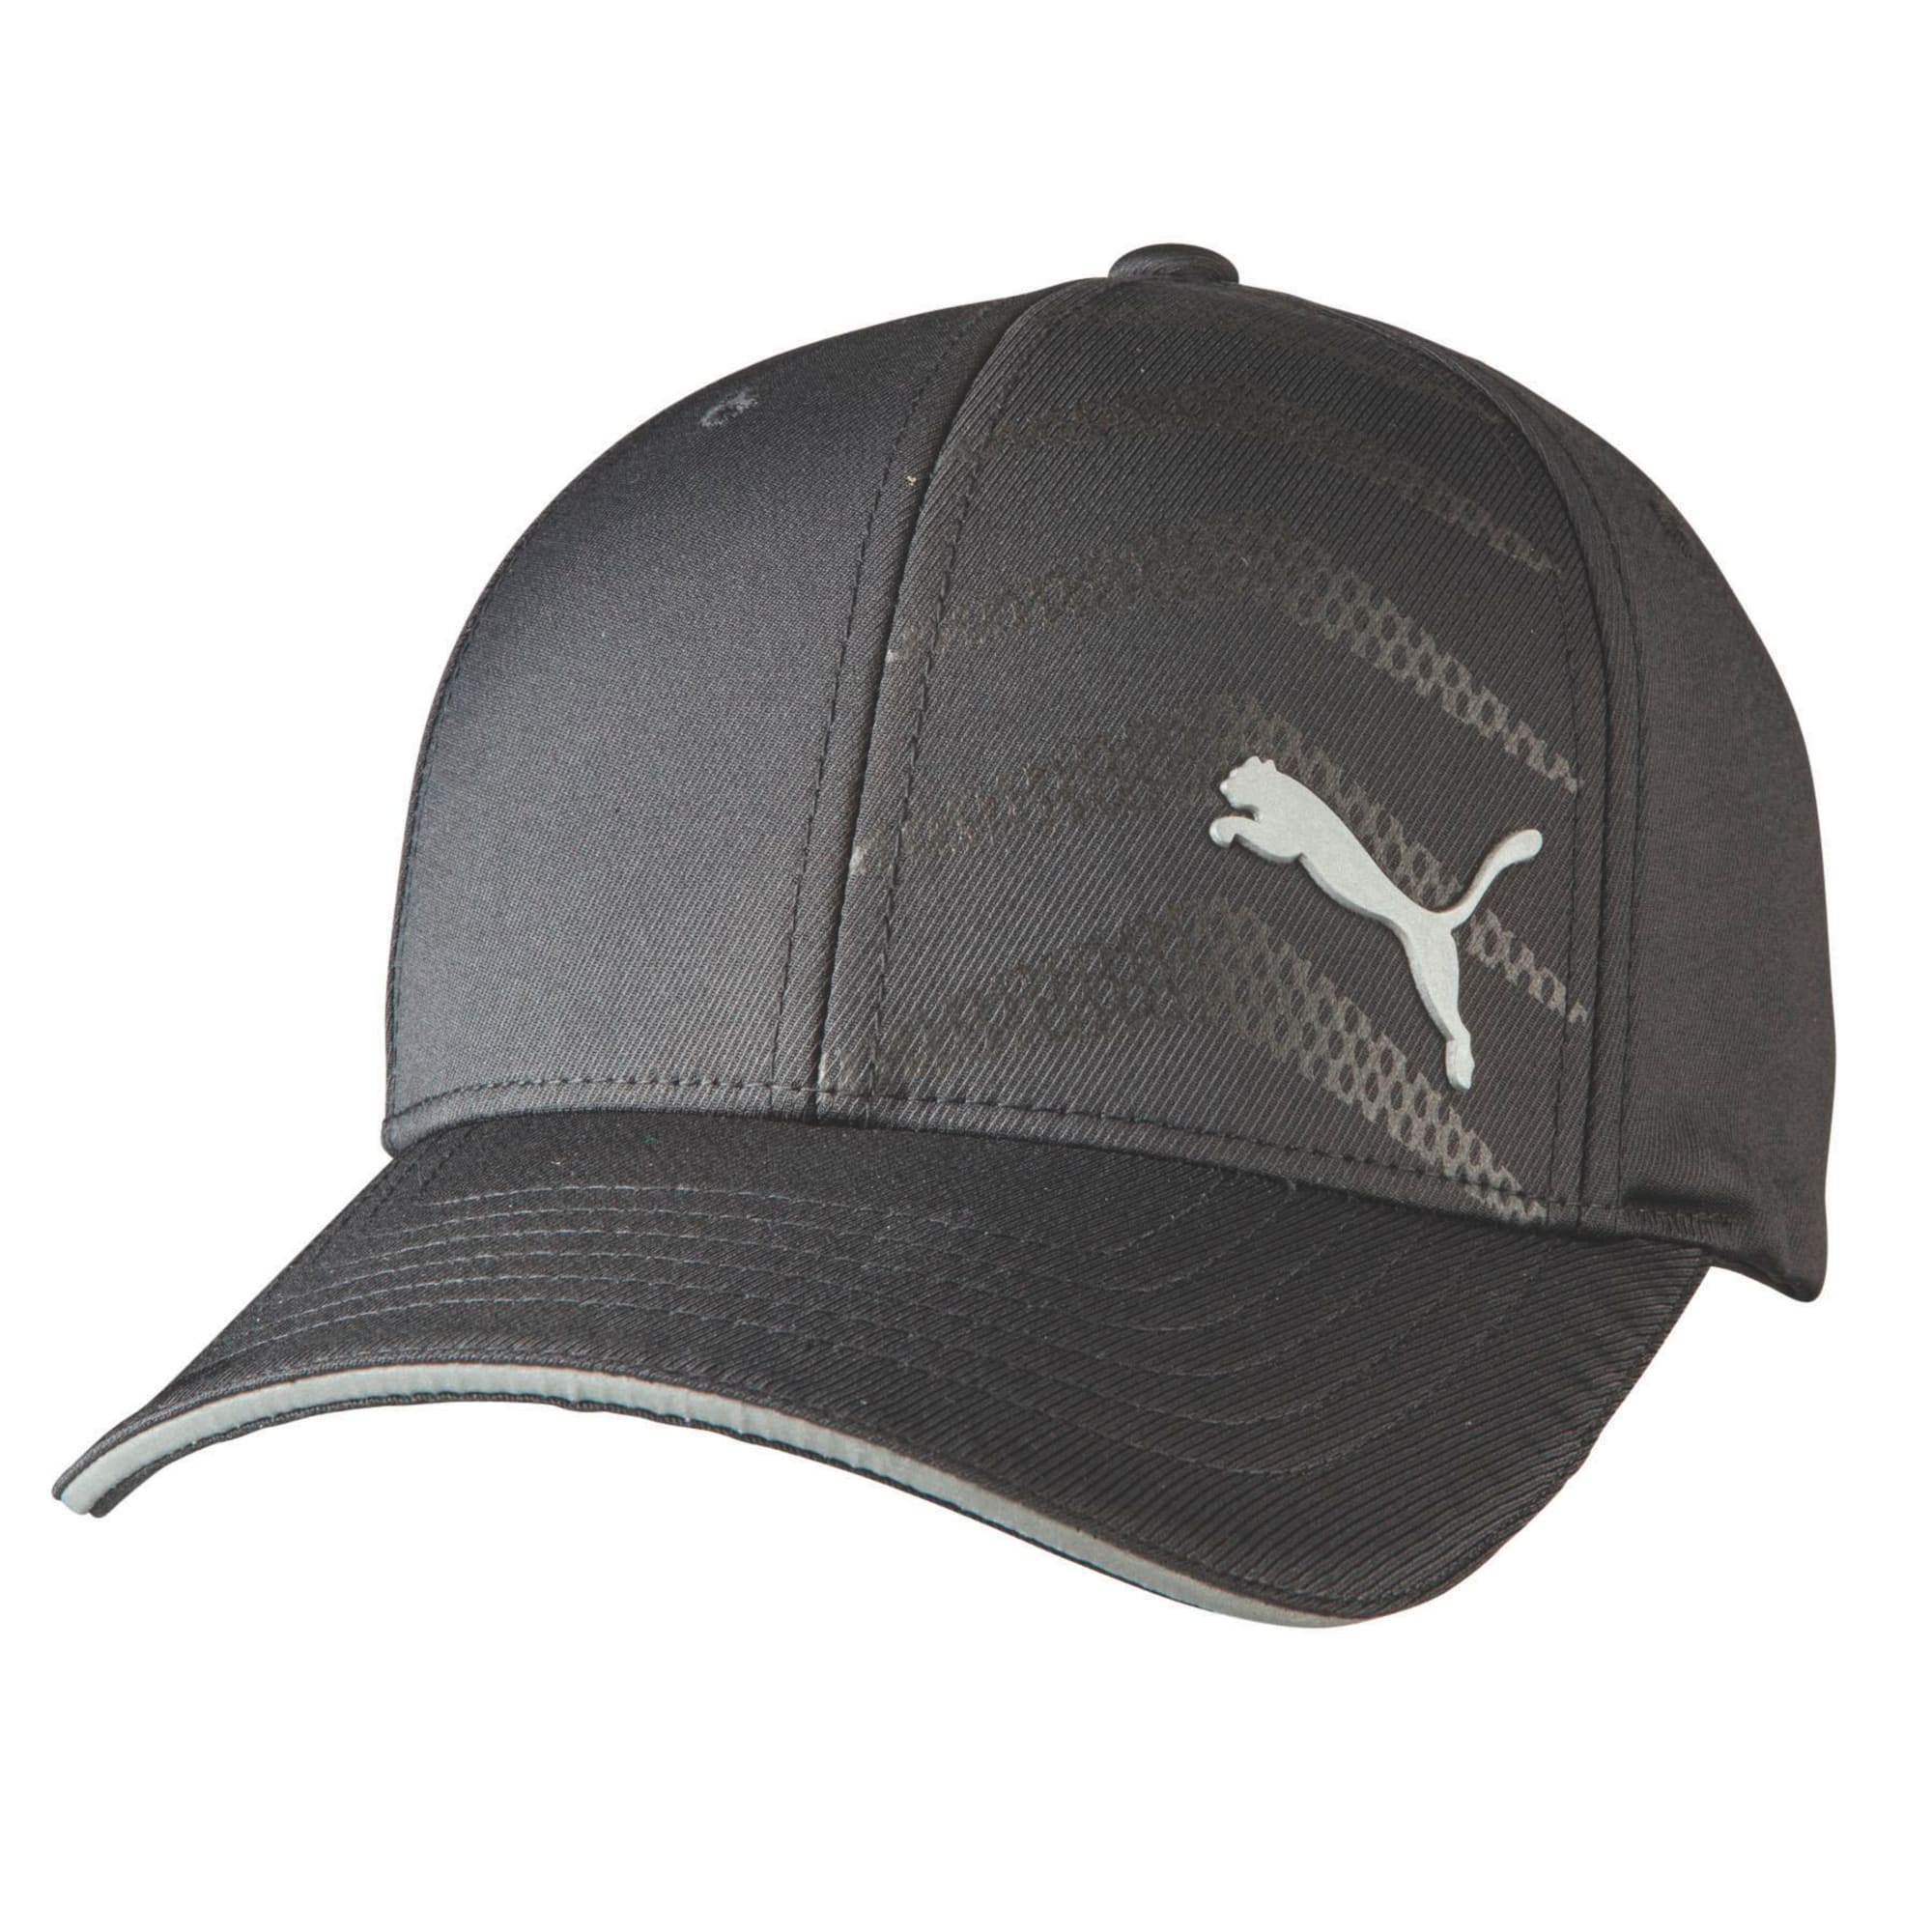 puma fitted hats